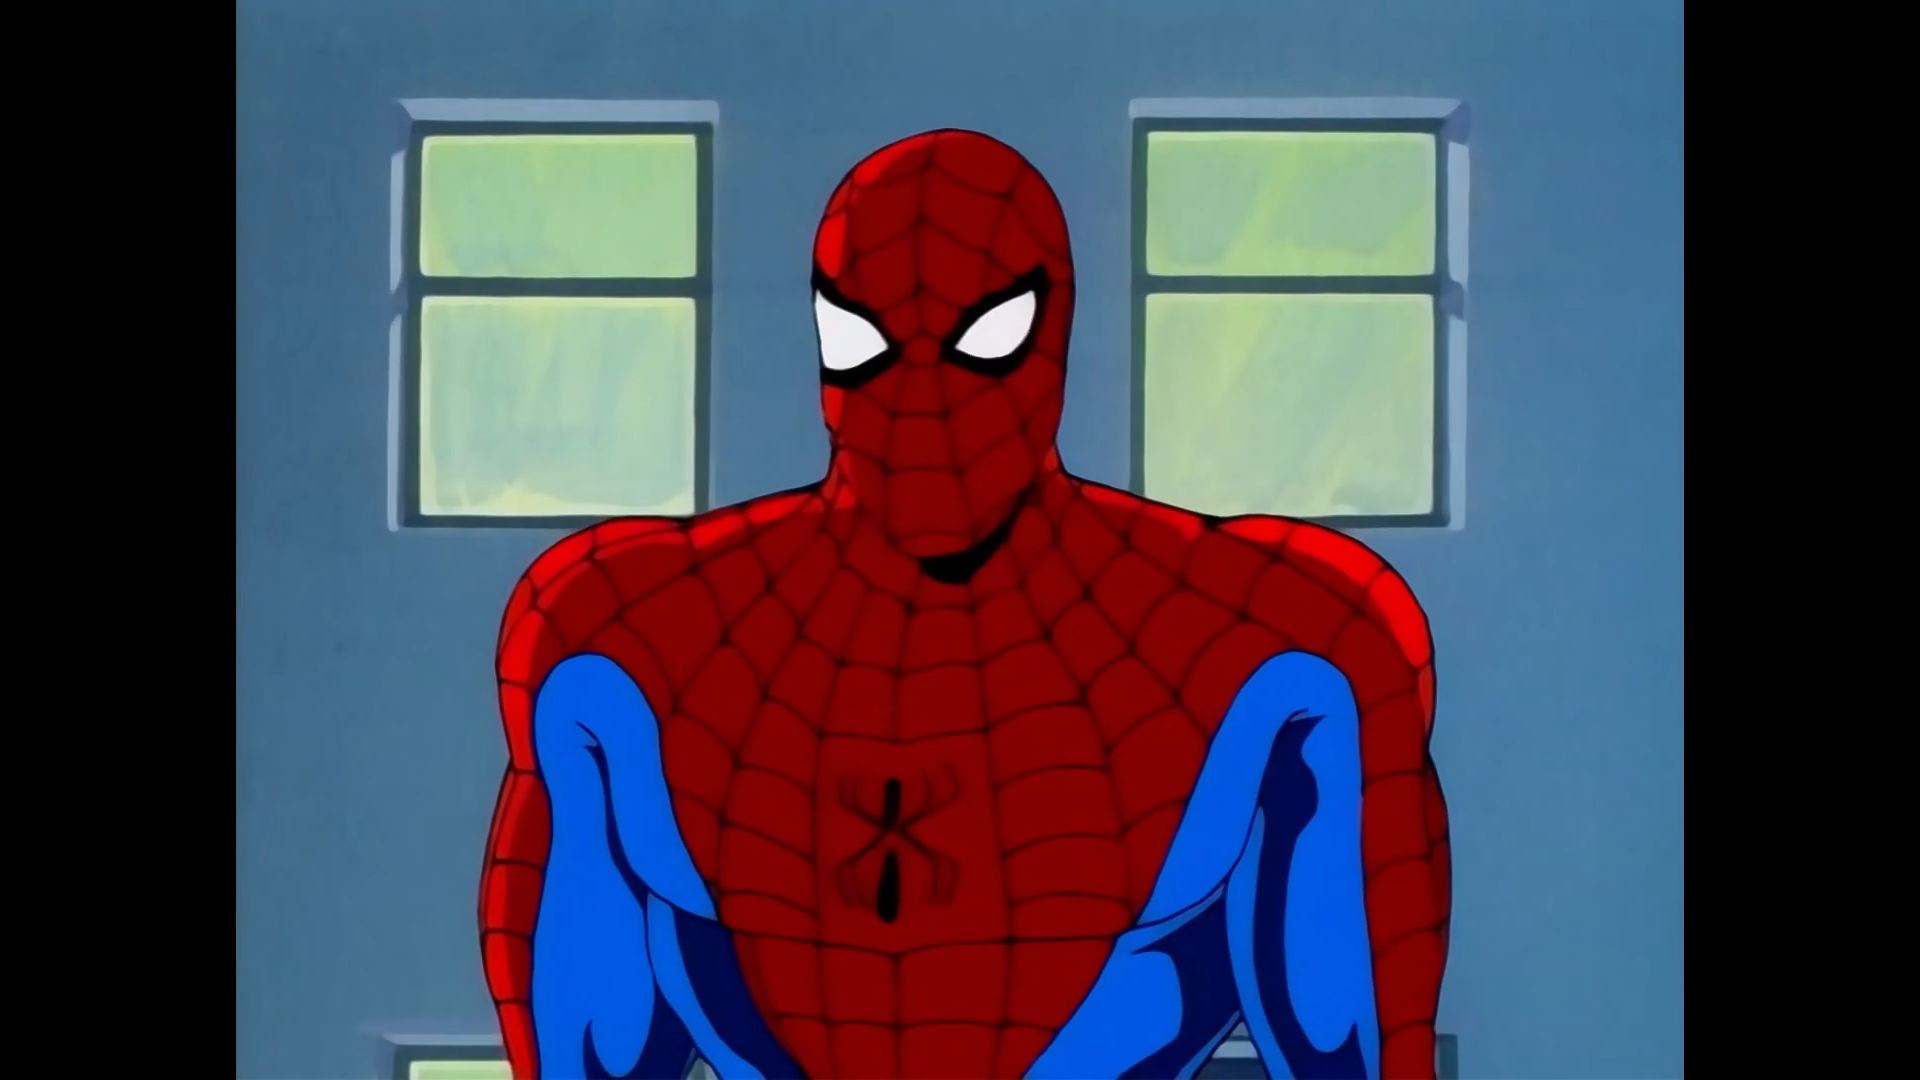 Shot from the fifth episode of the second season of the Spider-Man 1994 television series.